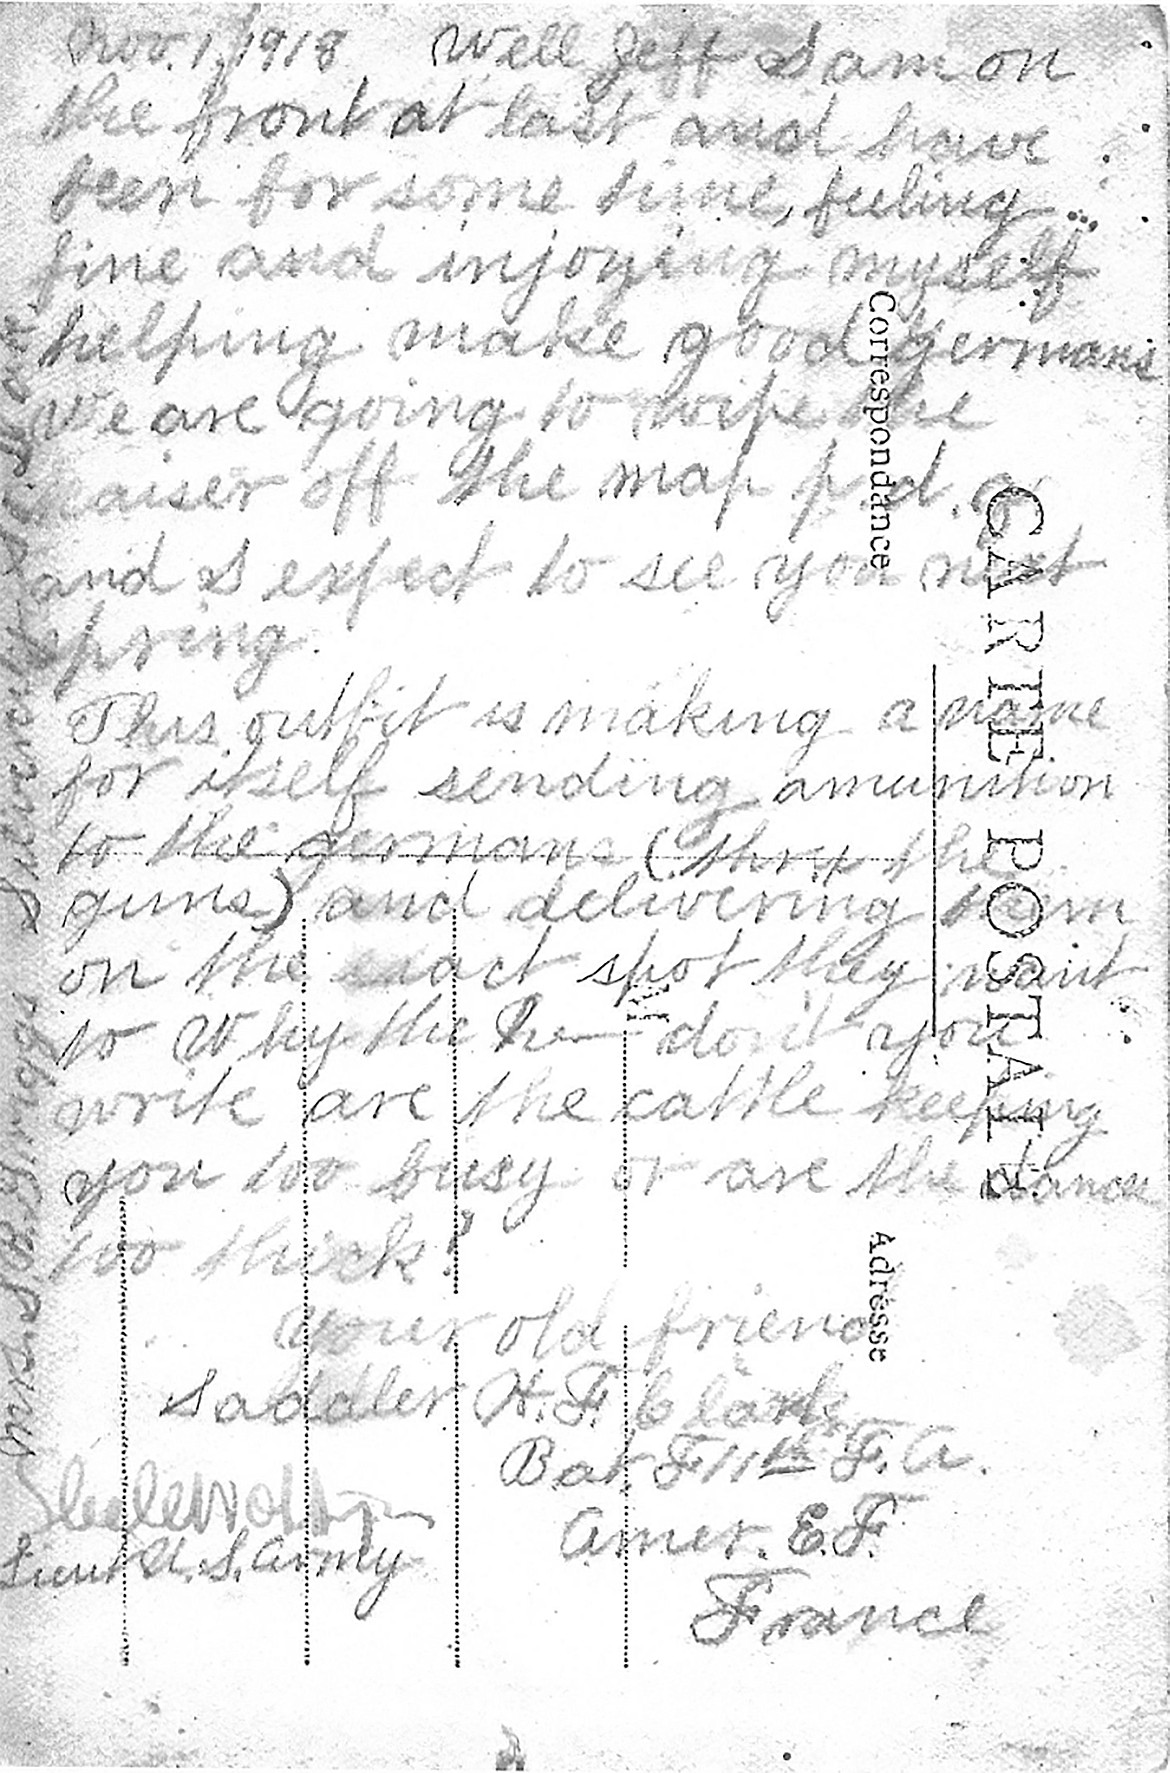 A letter written on the back of a postcard sent by Harry F. Clark from the front lines in France during World War I.